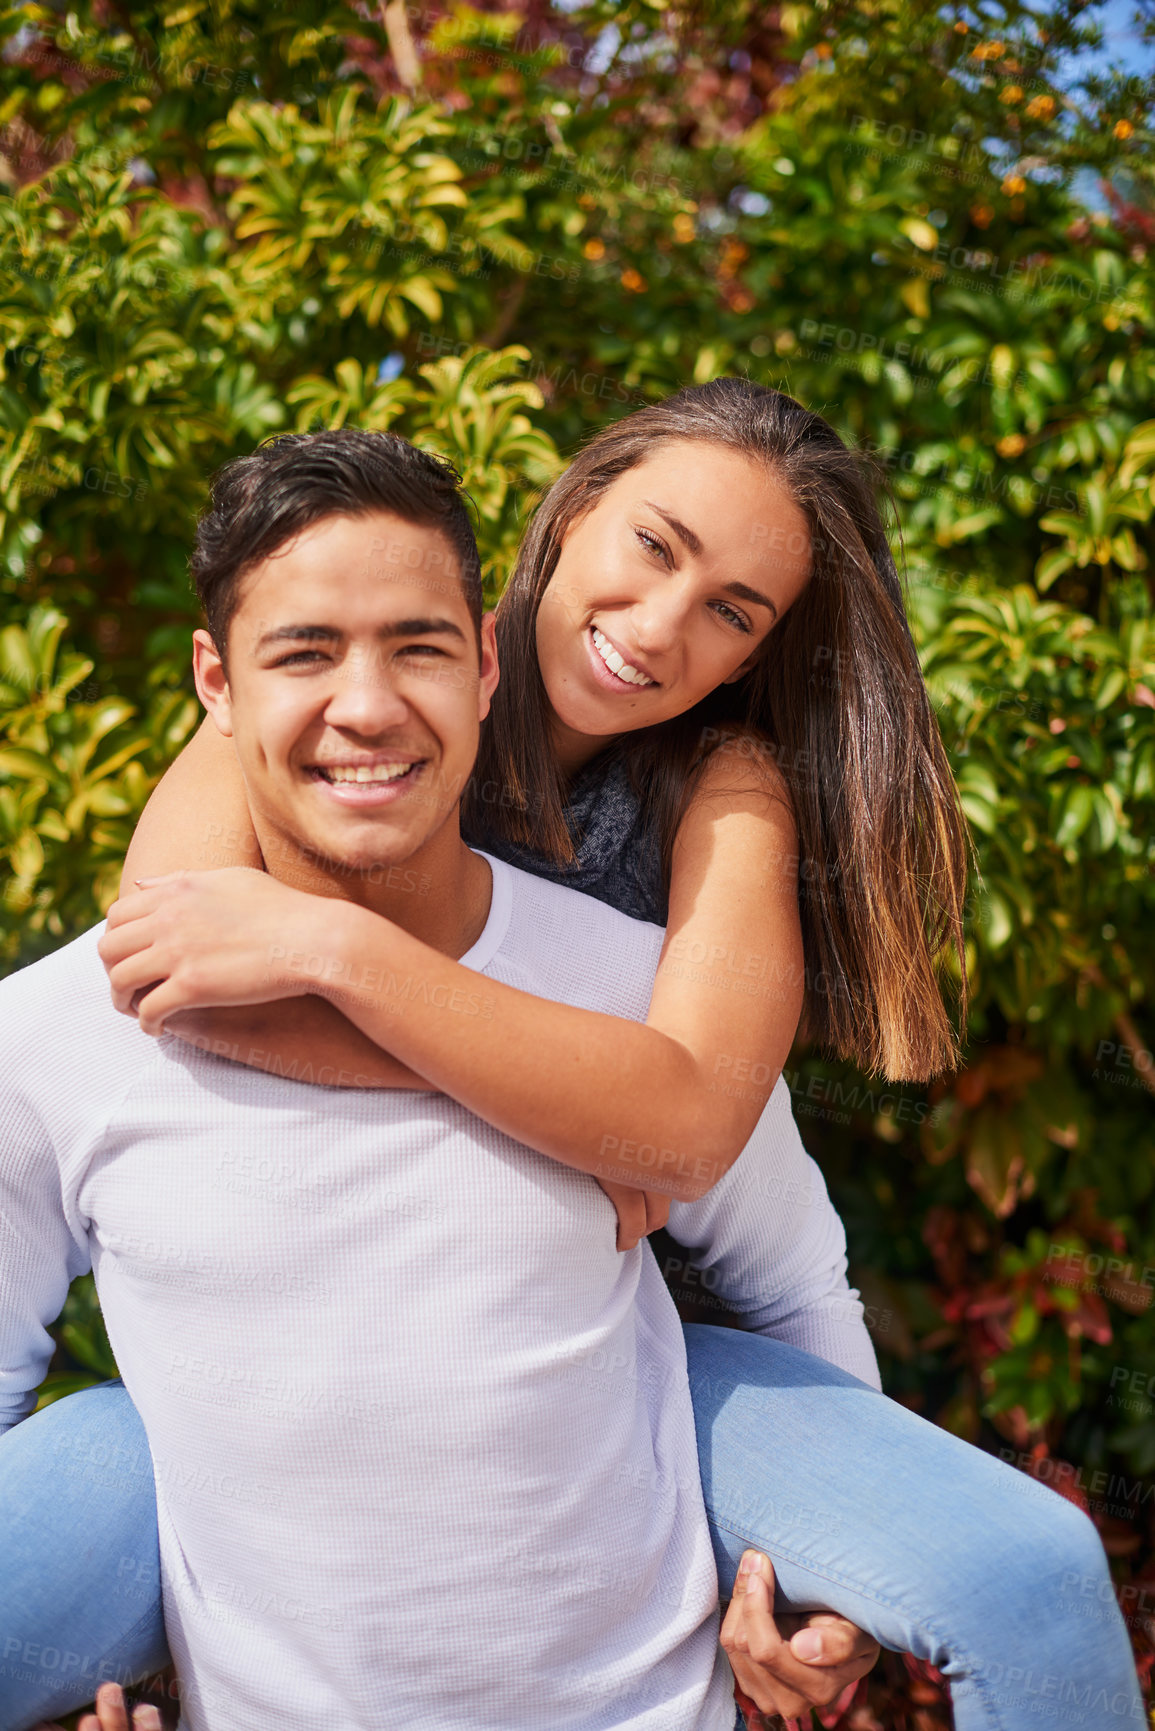 Buy stock photo Portrait of a smiling young man giving his girlfriend a piggyback outside